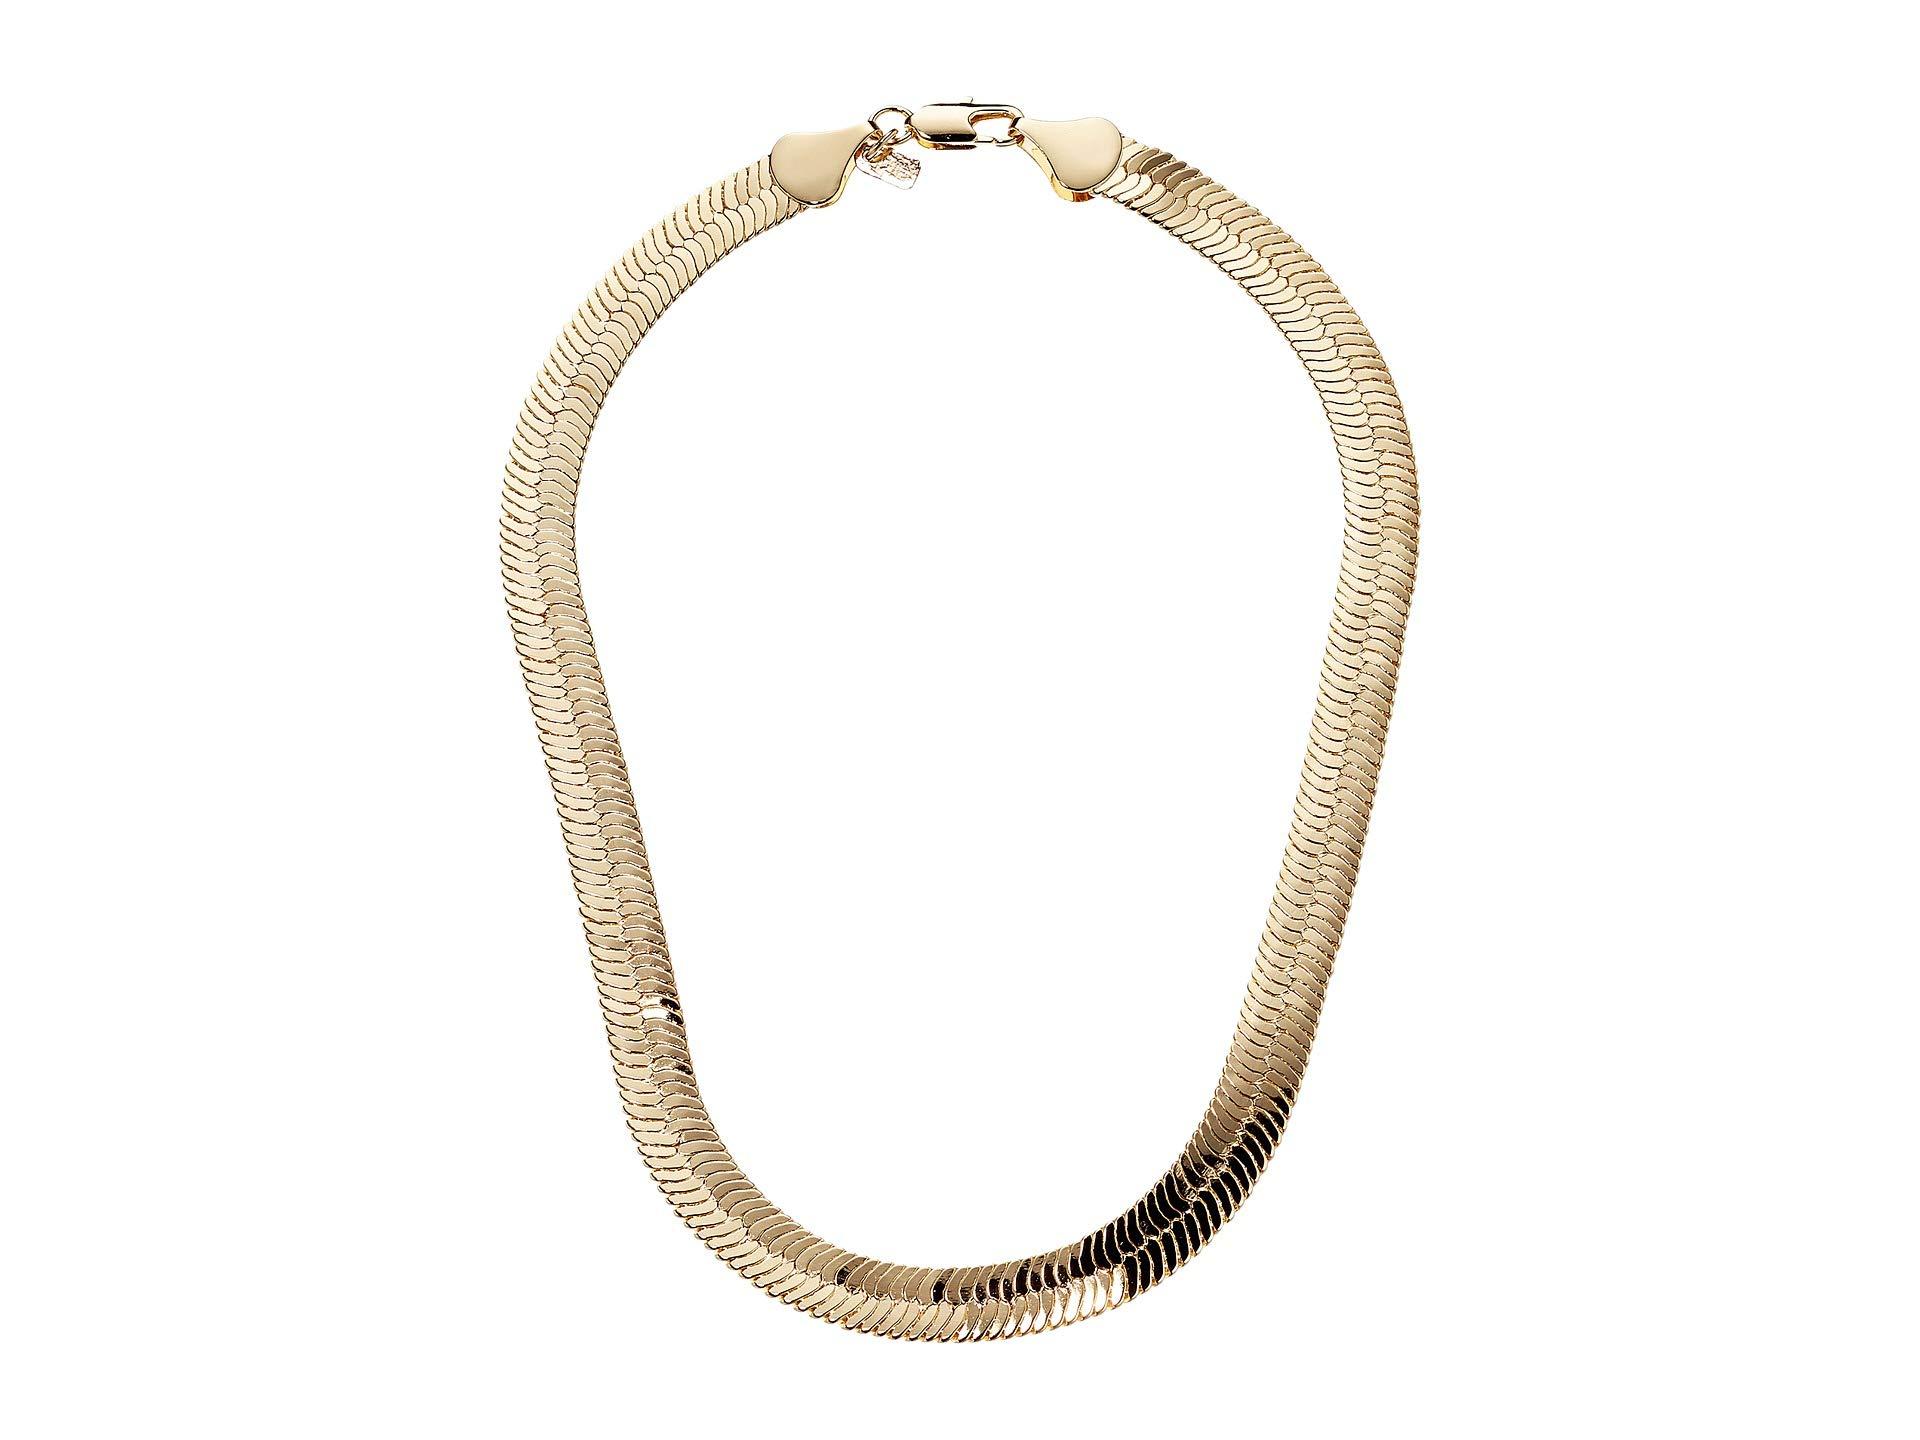 Lyst - Vanessa Mooney The Ghostface Chain Necklace (gold Plated ...